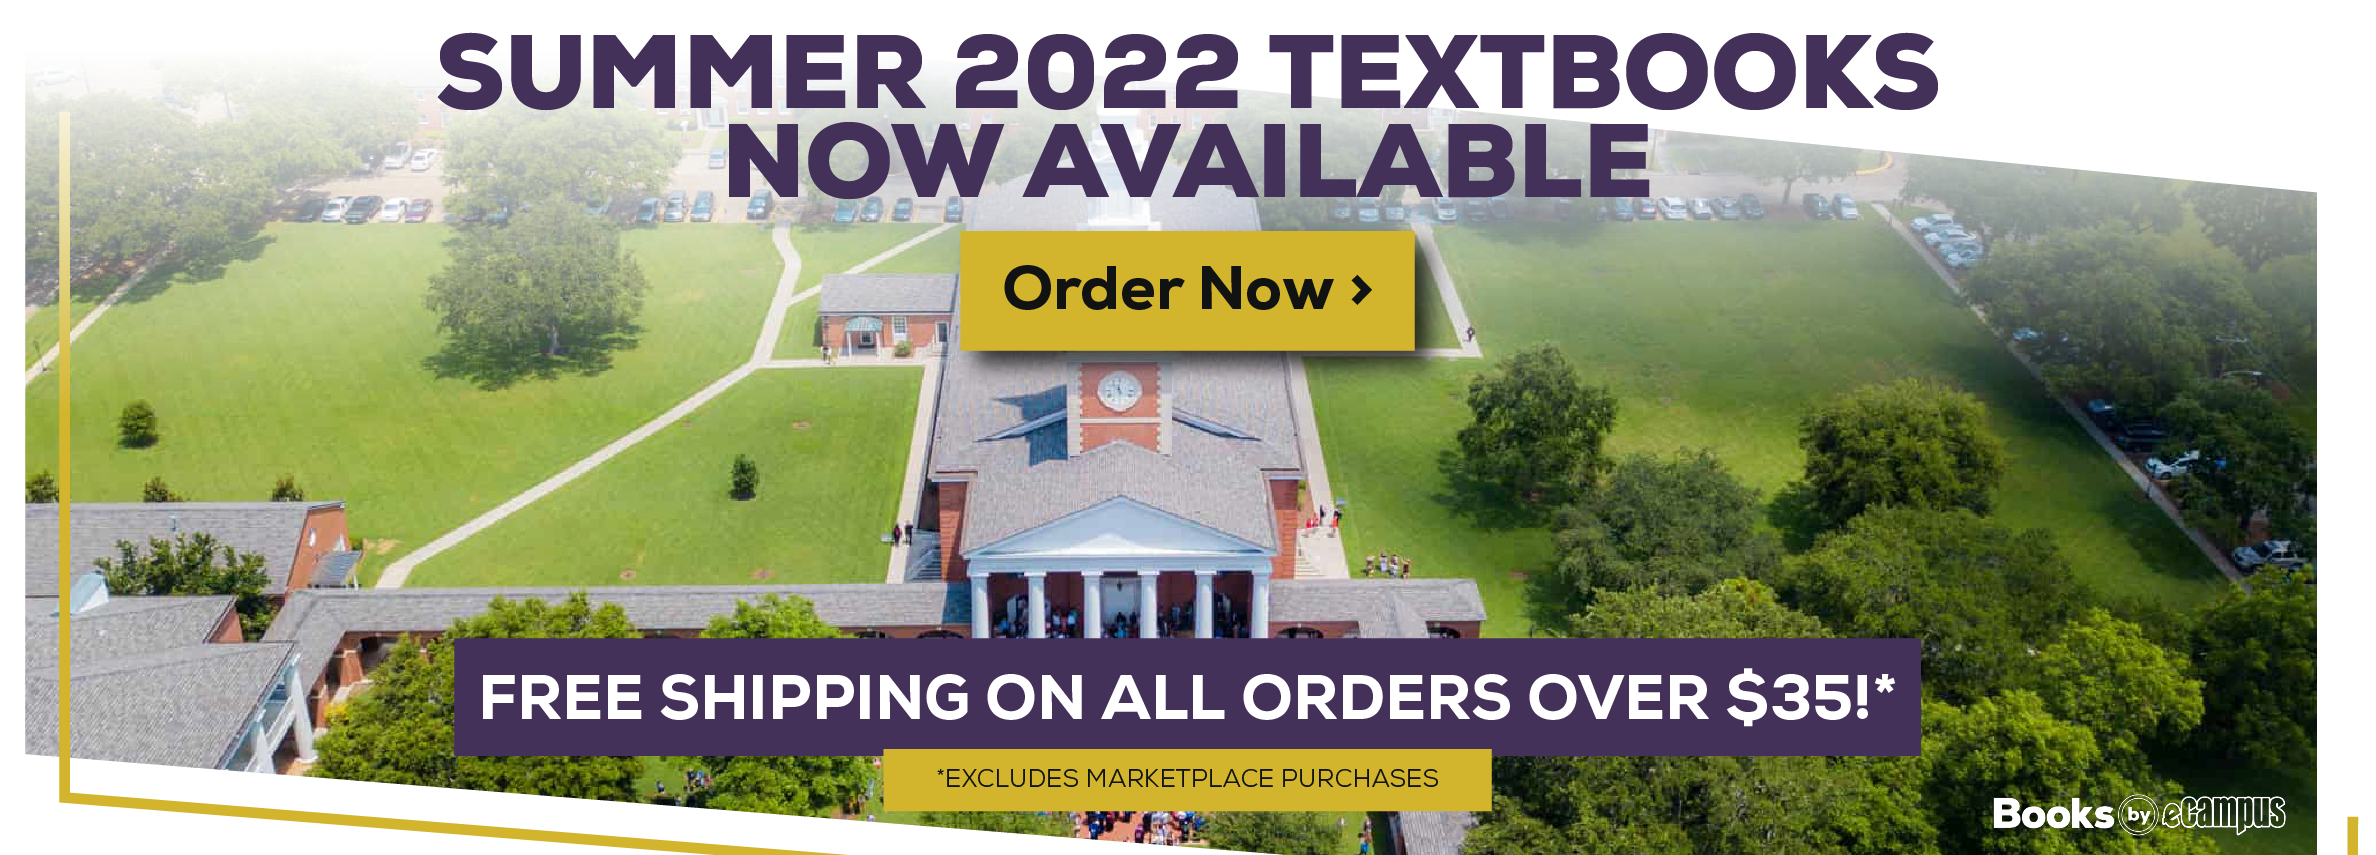 Summer 2022 Textbooks now available. order now. Free shipping on all orders over $35!